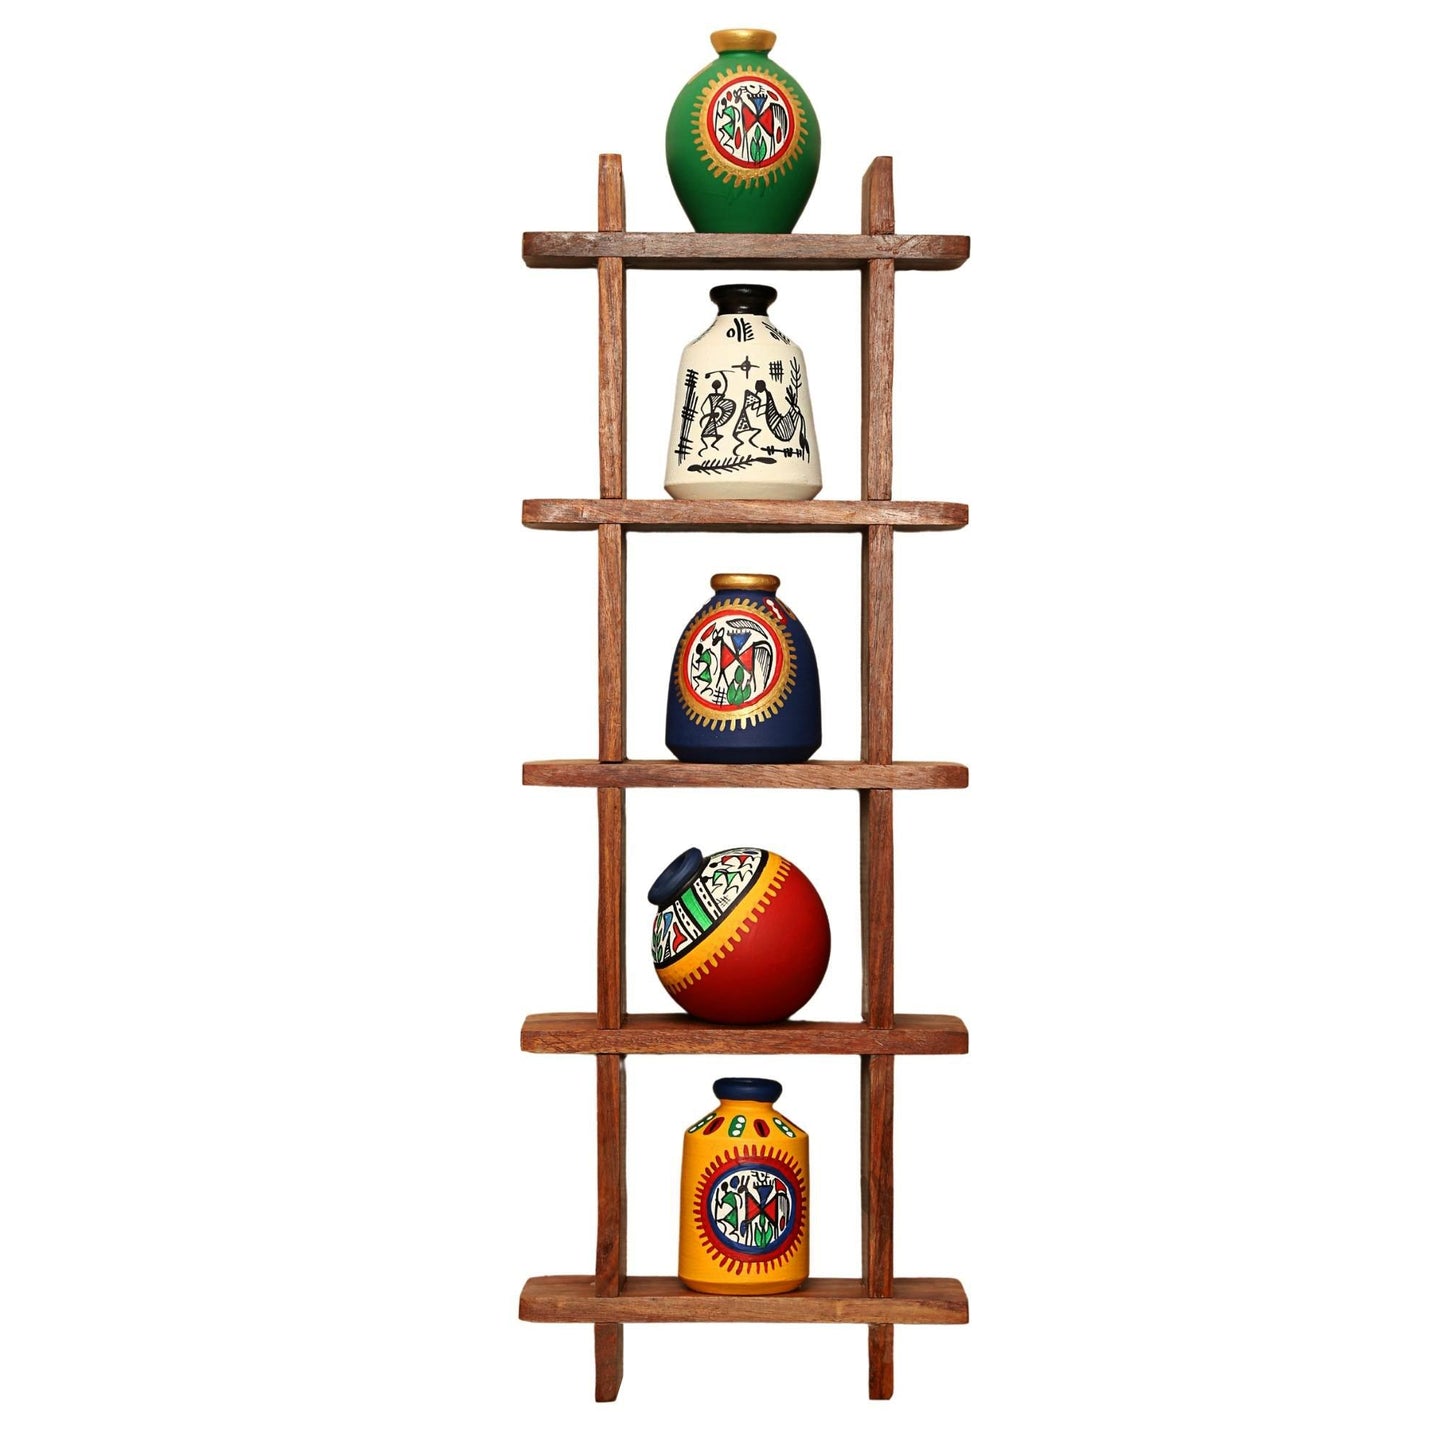 Wall Decor Ladder with 5 pots